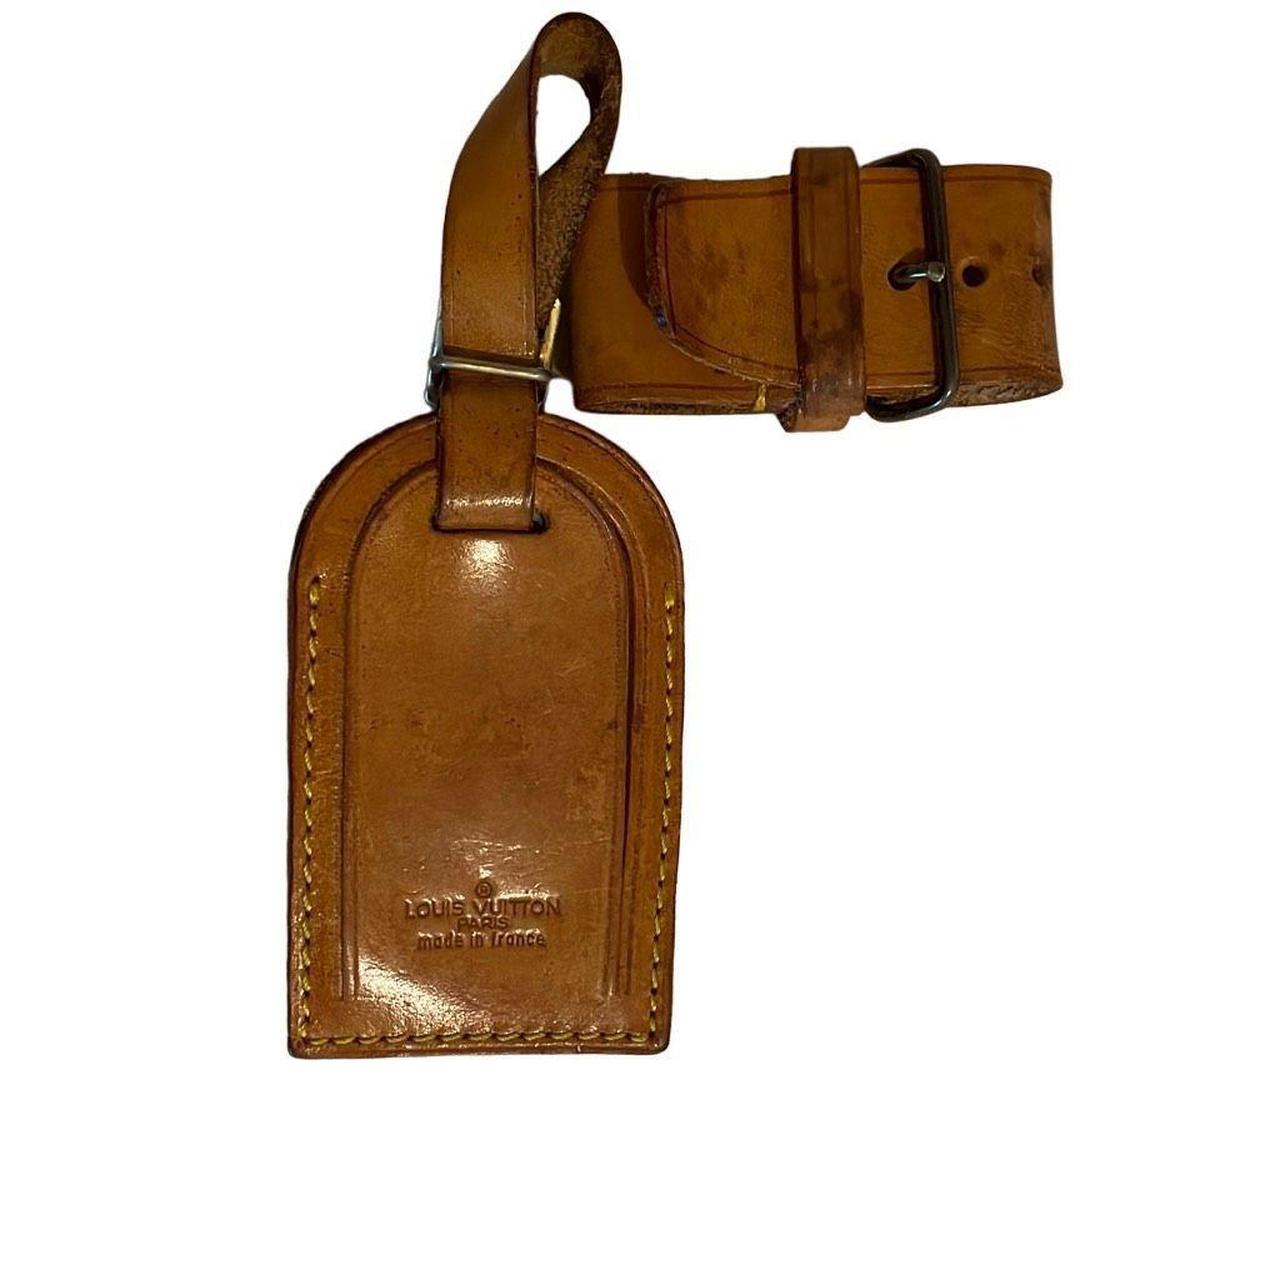 STUNNING Louis Vuitton luggage tag. Never used. Was - Depop